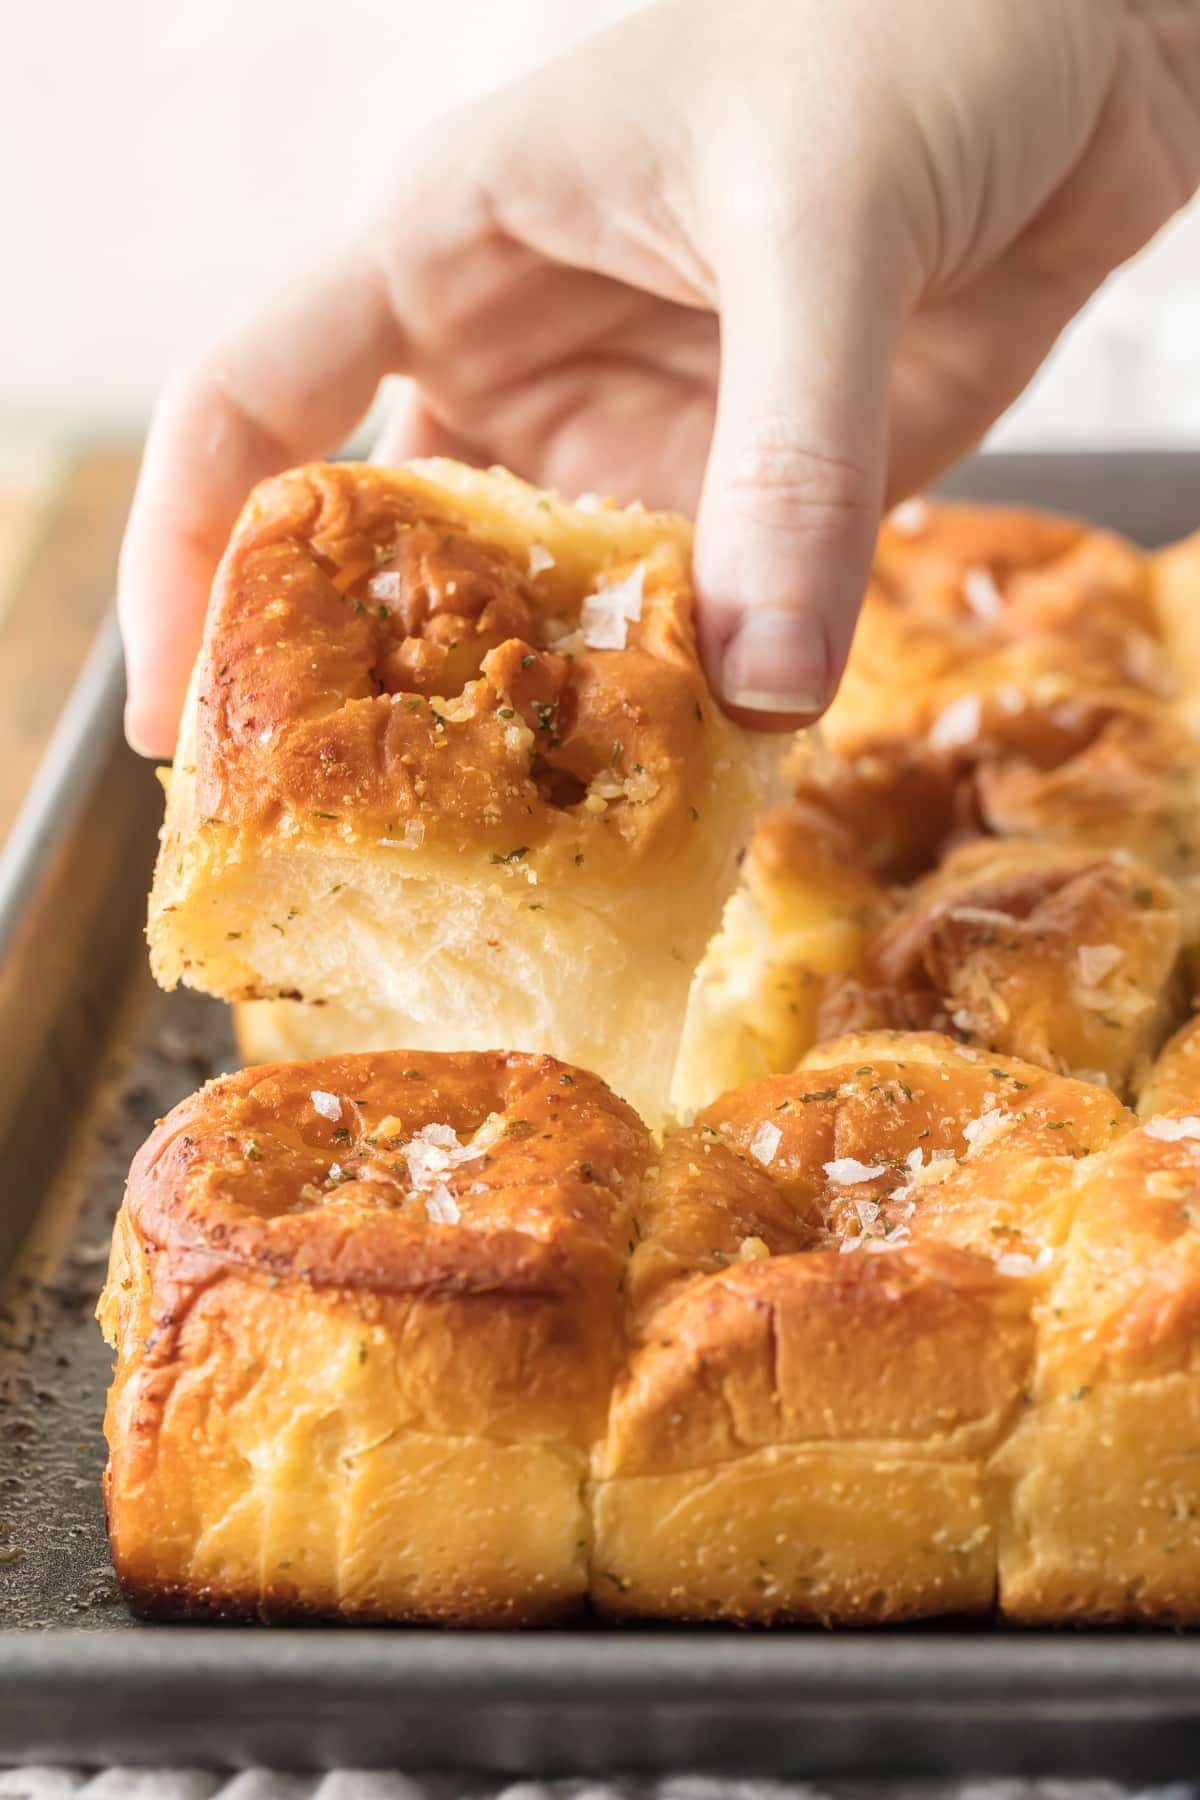 These EASY Garlic Butter Hawaiian Rolls are literally the best rolls I have EVER TASTED! Made in just minutes and SO easy, the perfect bread side for Thanksgiving, Christmas, or any holiday!